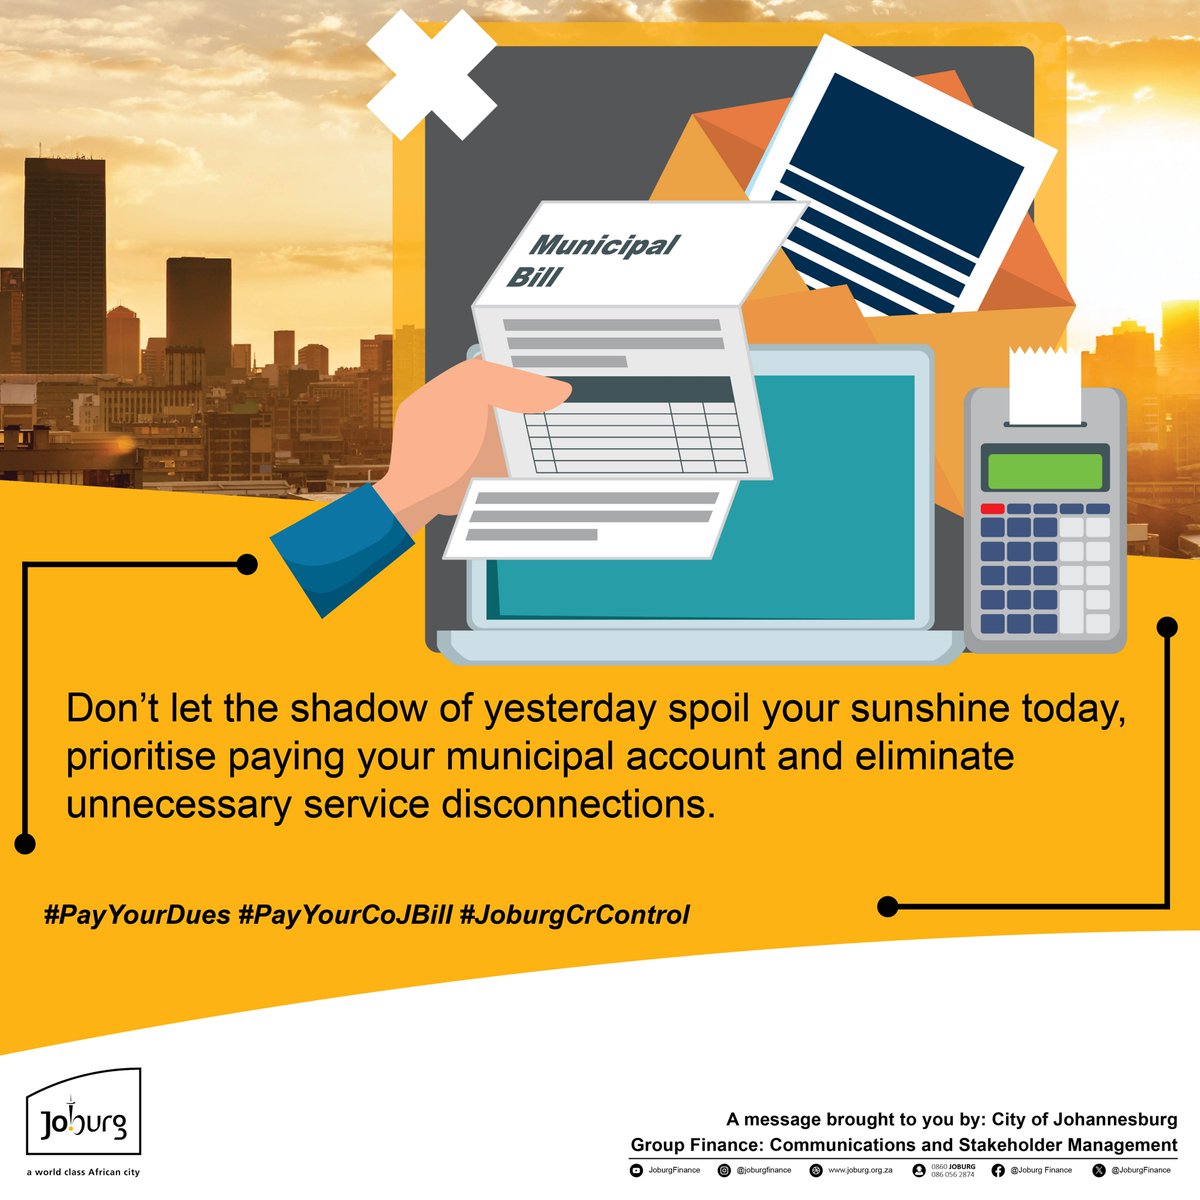 Don't let the shadow of yesterday spoil your sunshine today, prioritise paying your municipal account and eliminate unnecessary service disconnections. ^KS #PayYourDues #PayYourCOJBill #JoburgCrControl @CityofJoburgZA @JHBWater @CityPowerJhb